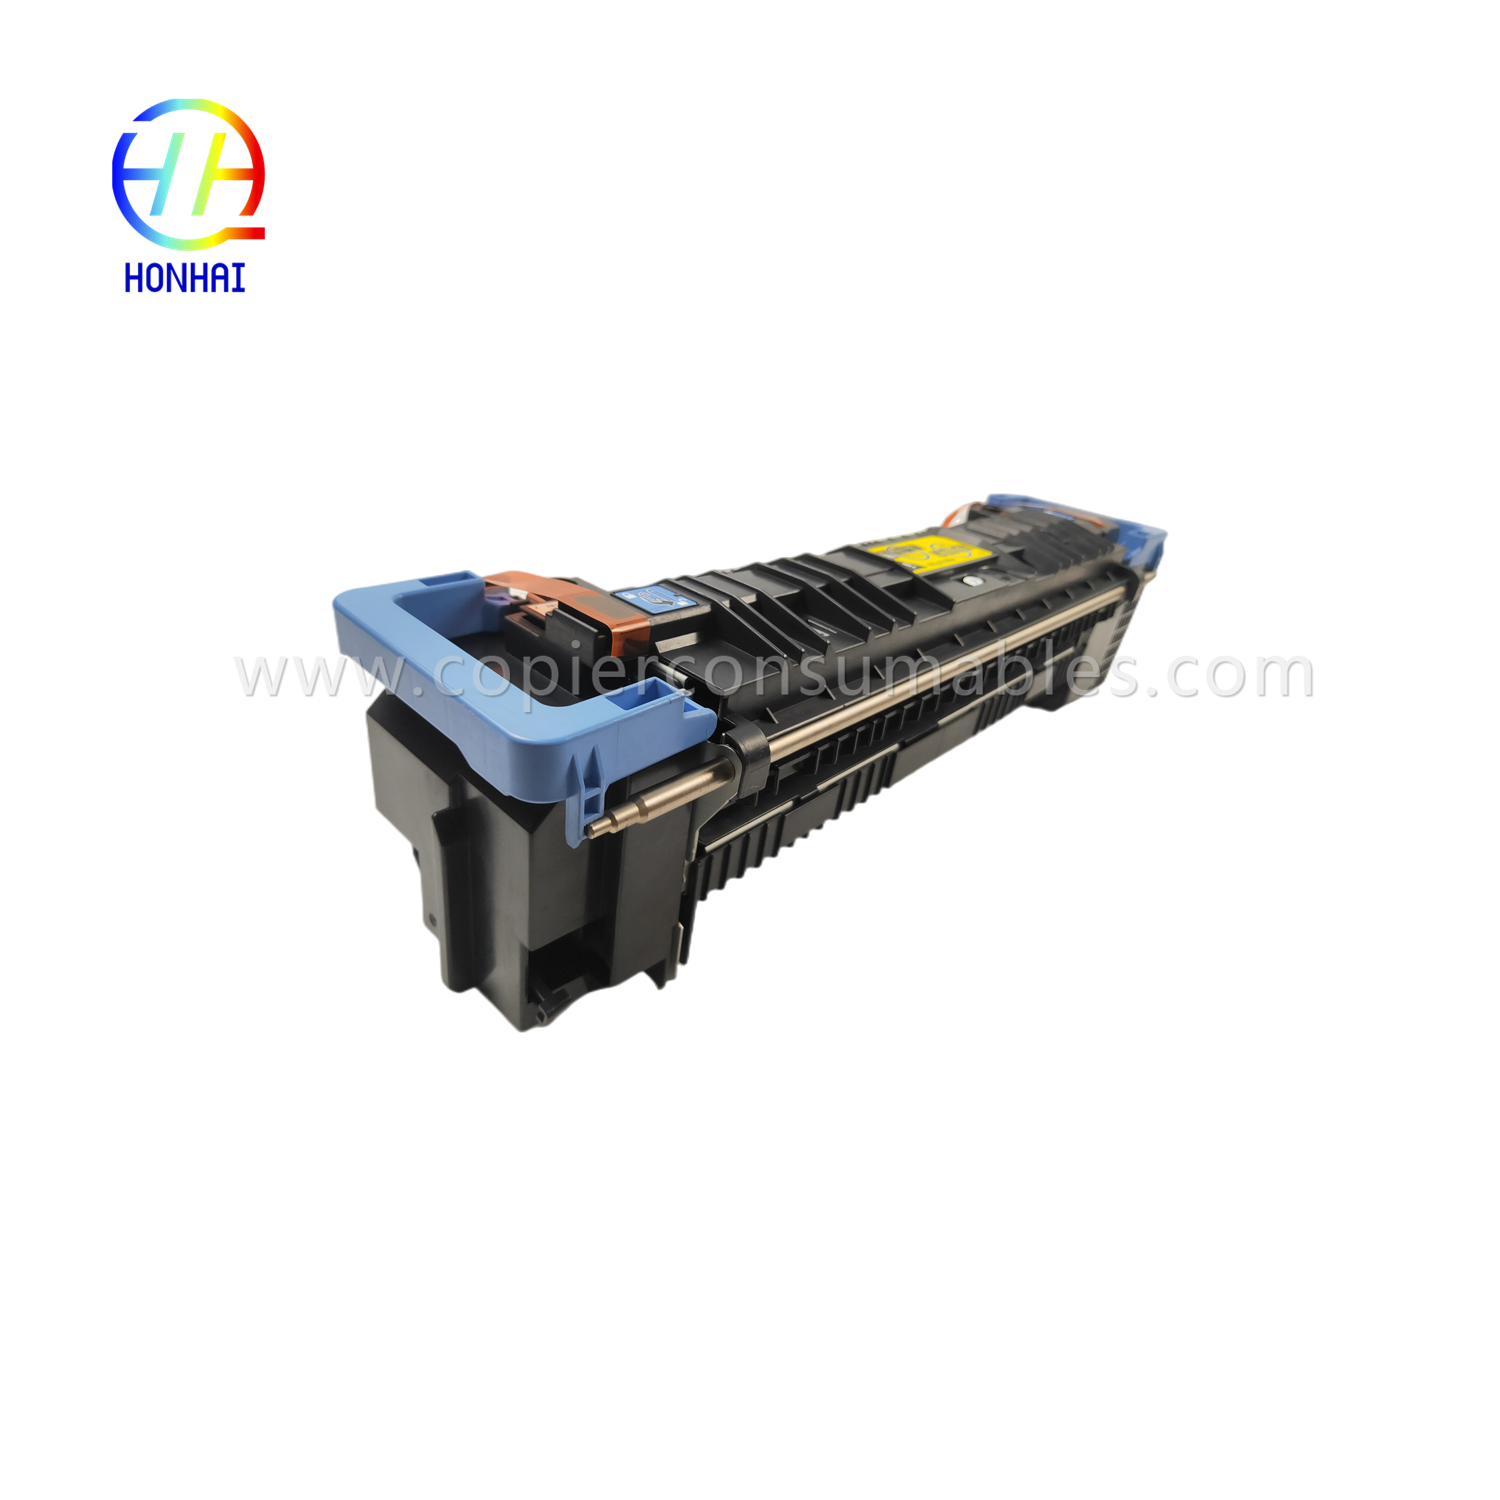 https://c585.goodao.net/fuser-assembly-unit-for-hp-m855-m880-m855dn-m855xh-m880z-m880z-c1n54-67901-c1n58-67901-fusing-heating-fixing-assy-product/